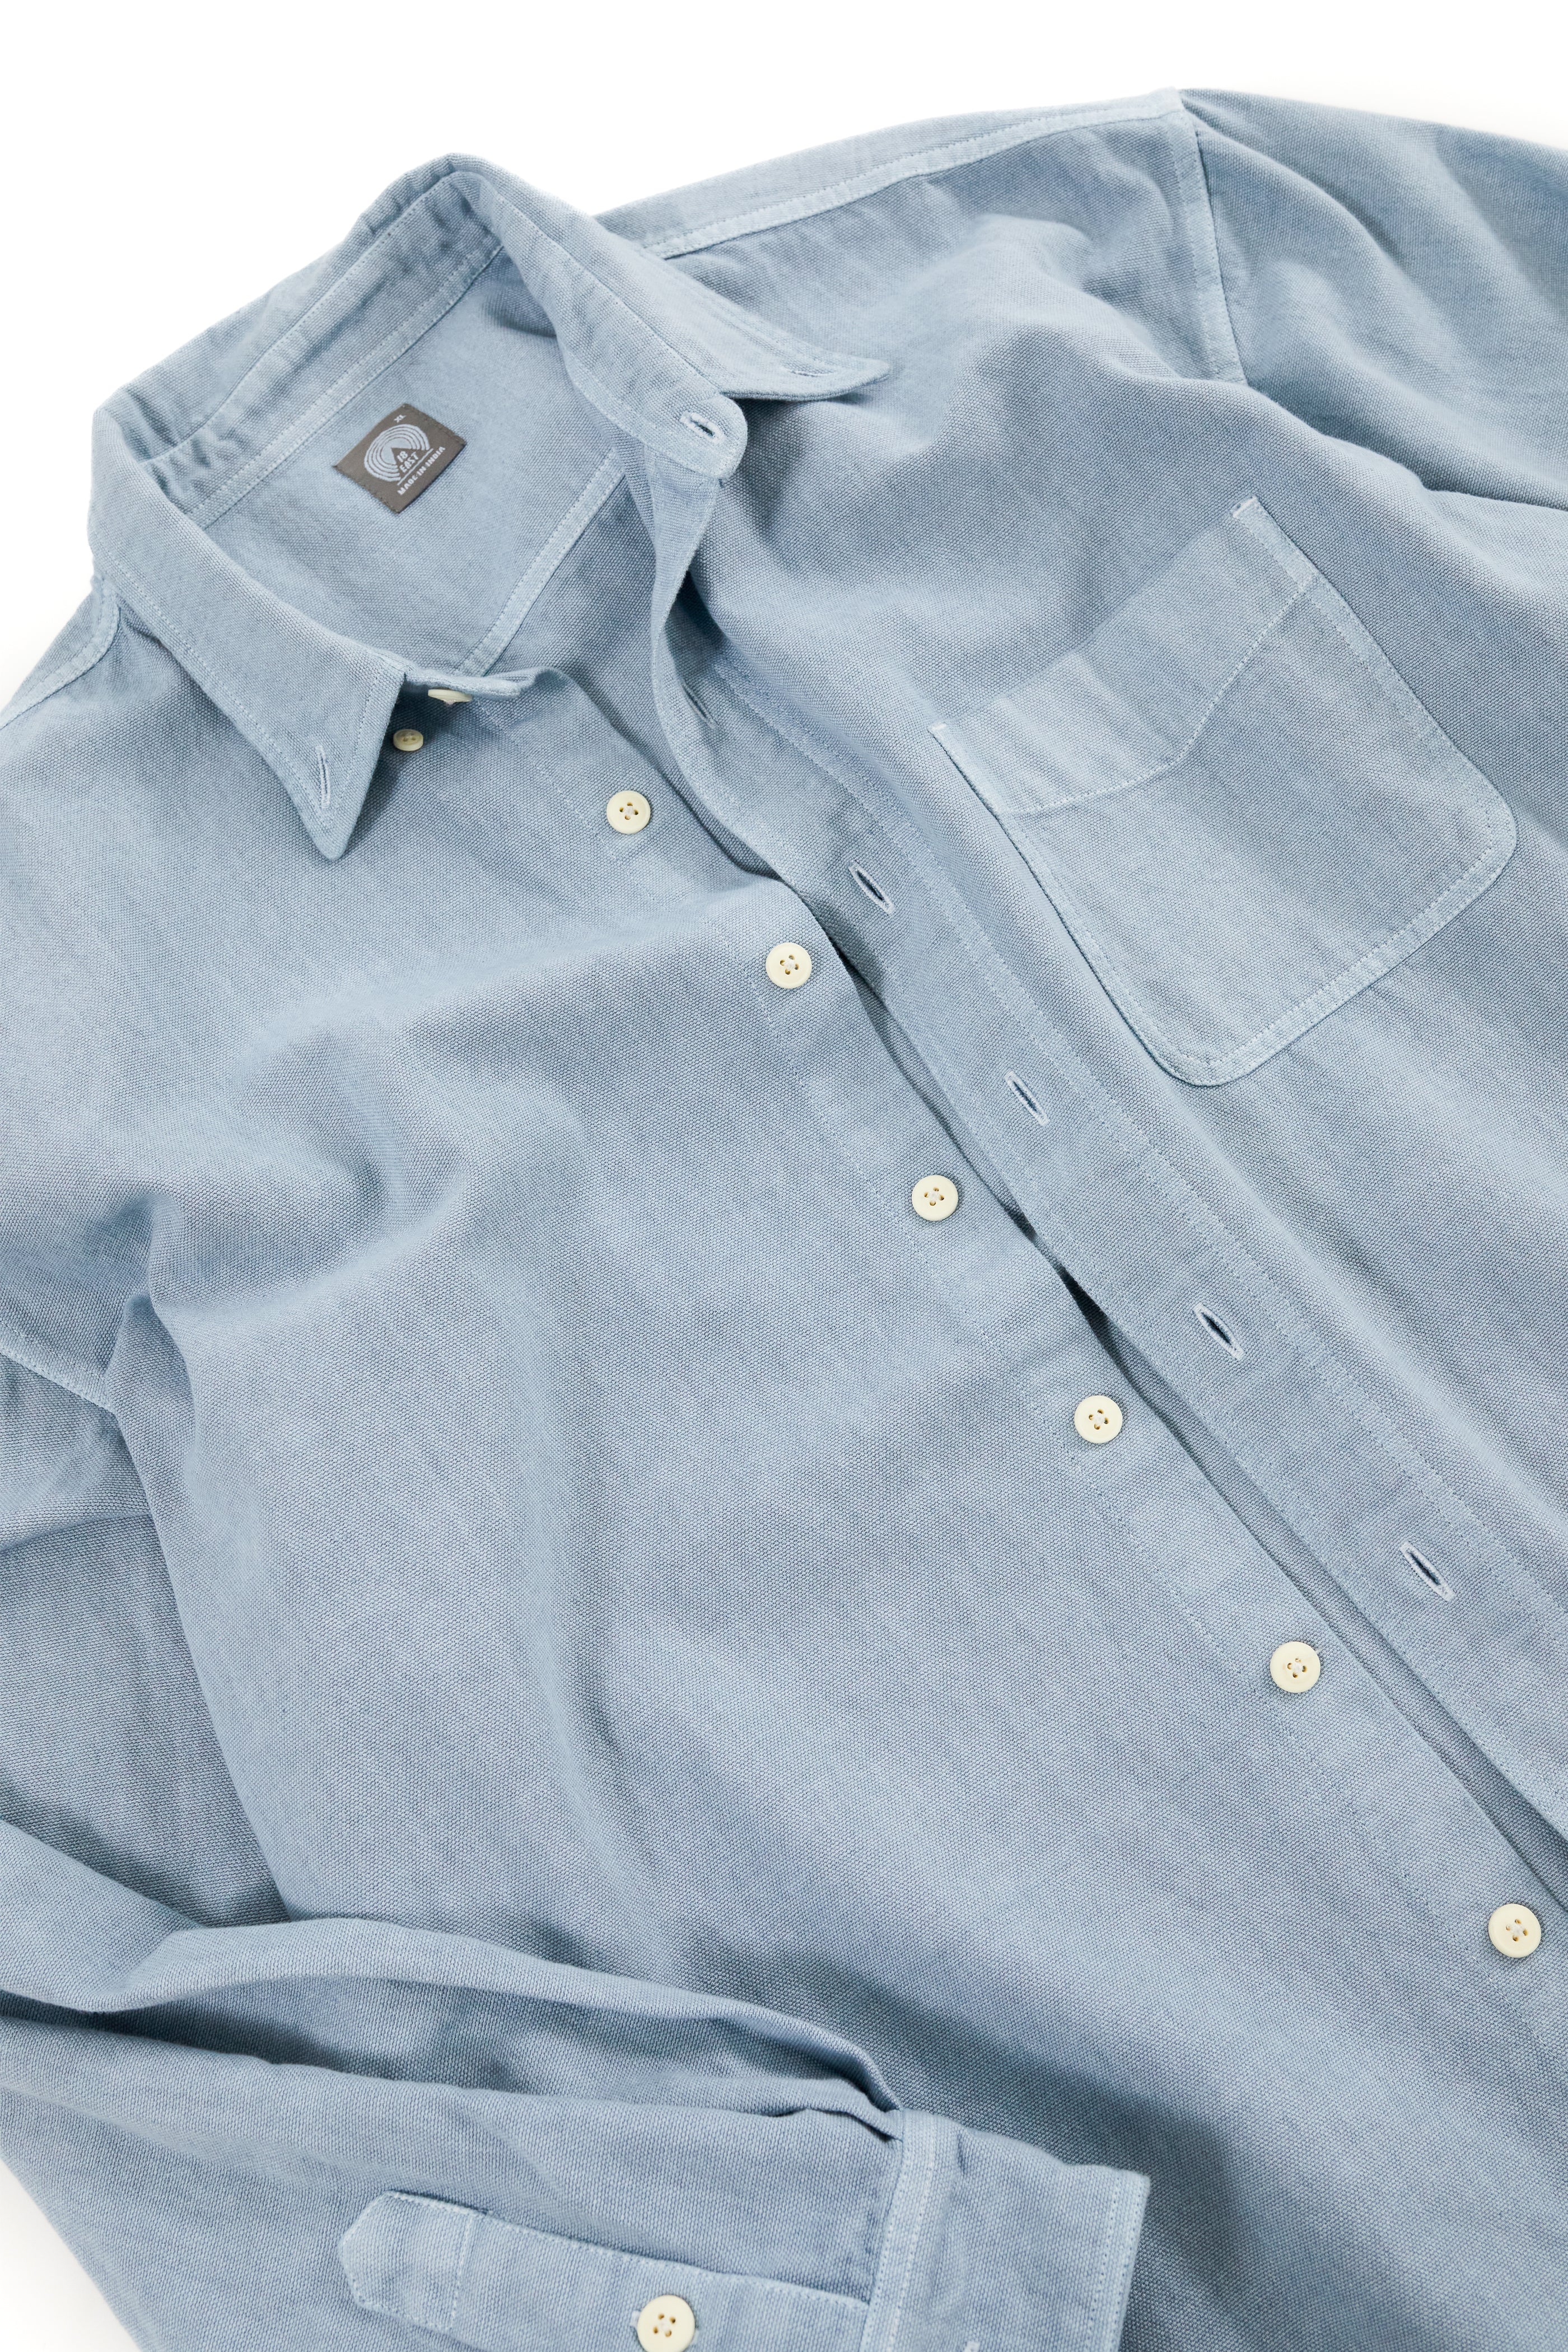 WOLF BUTTON-DOWN SHIRT - BLUE FOG PIGMENT DYED OXFORD